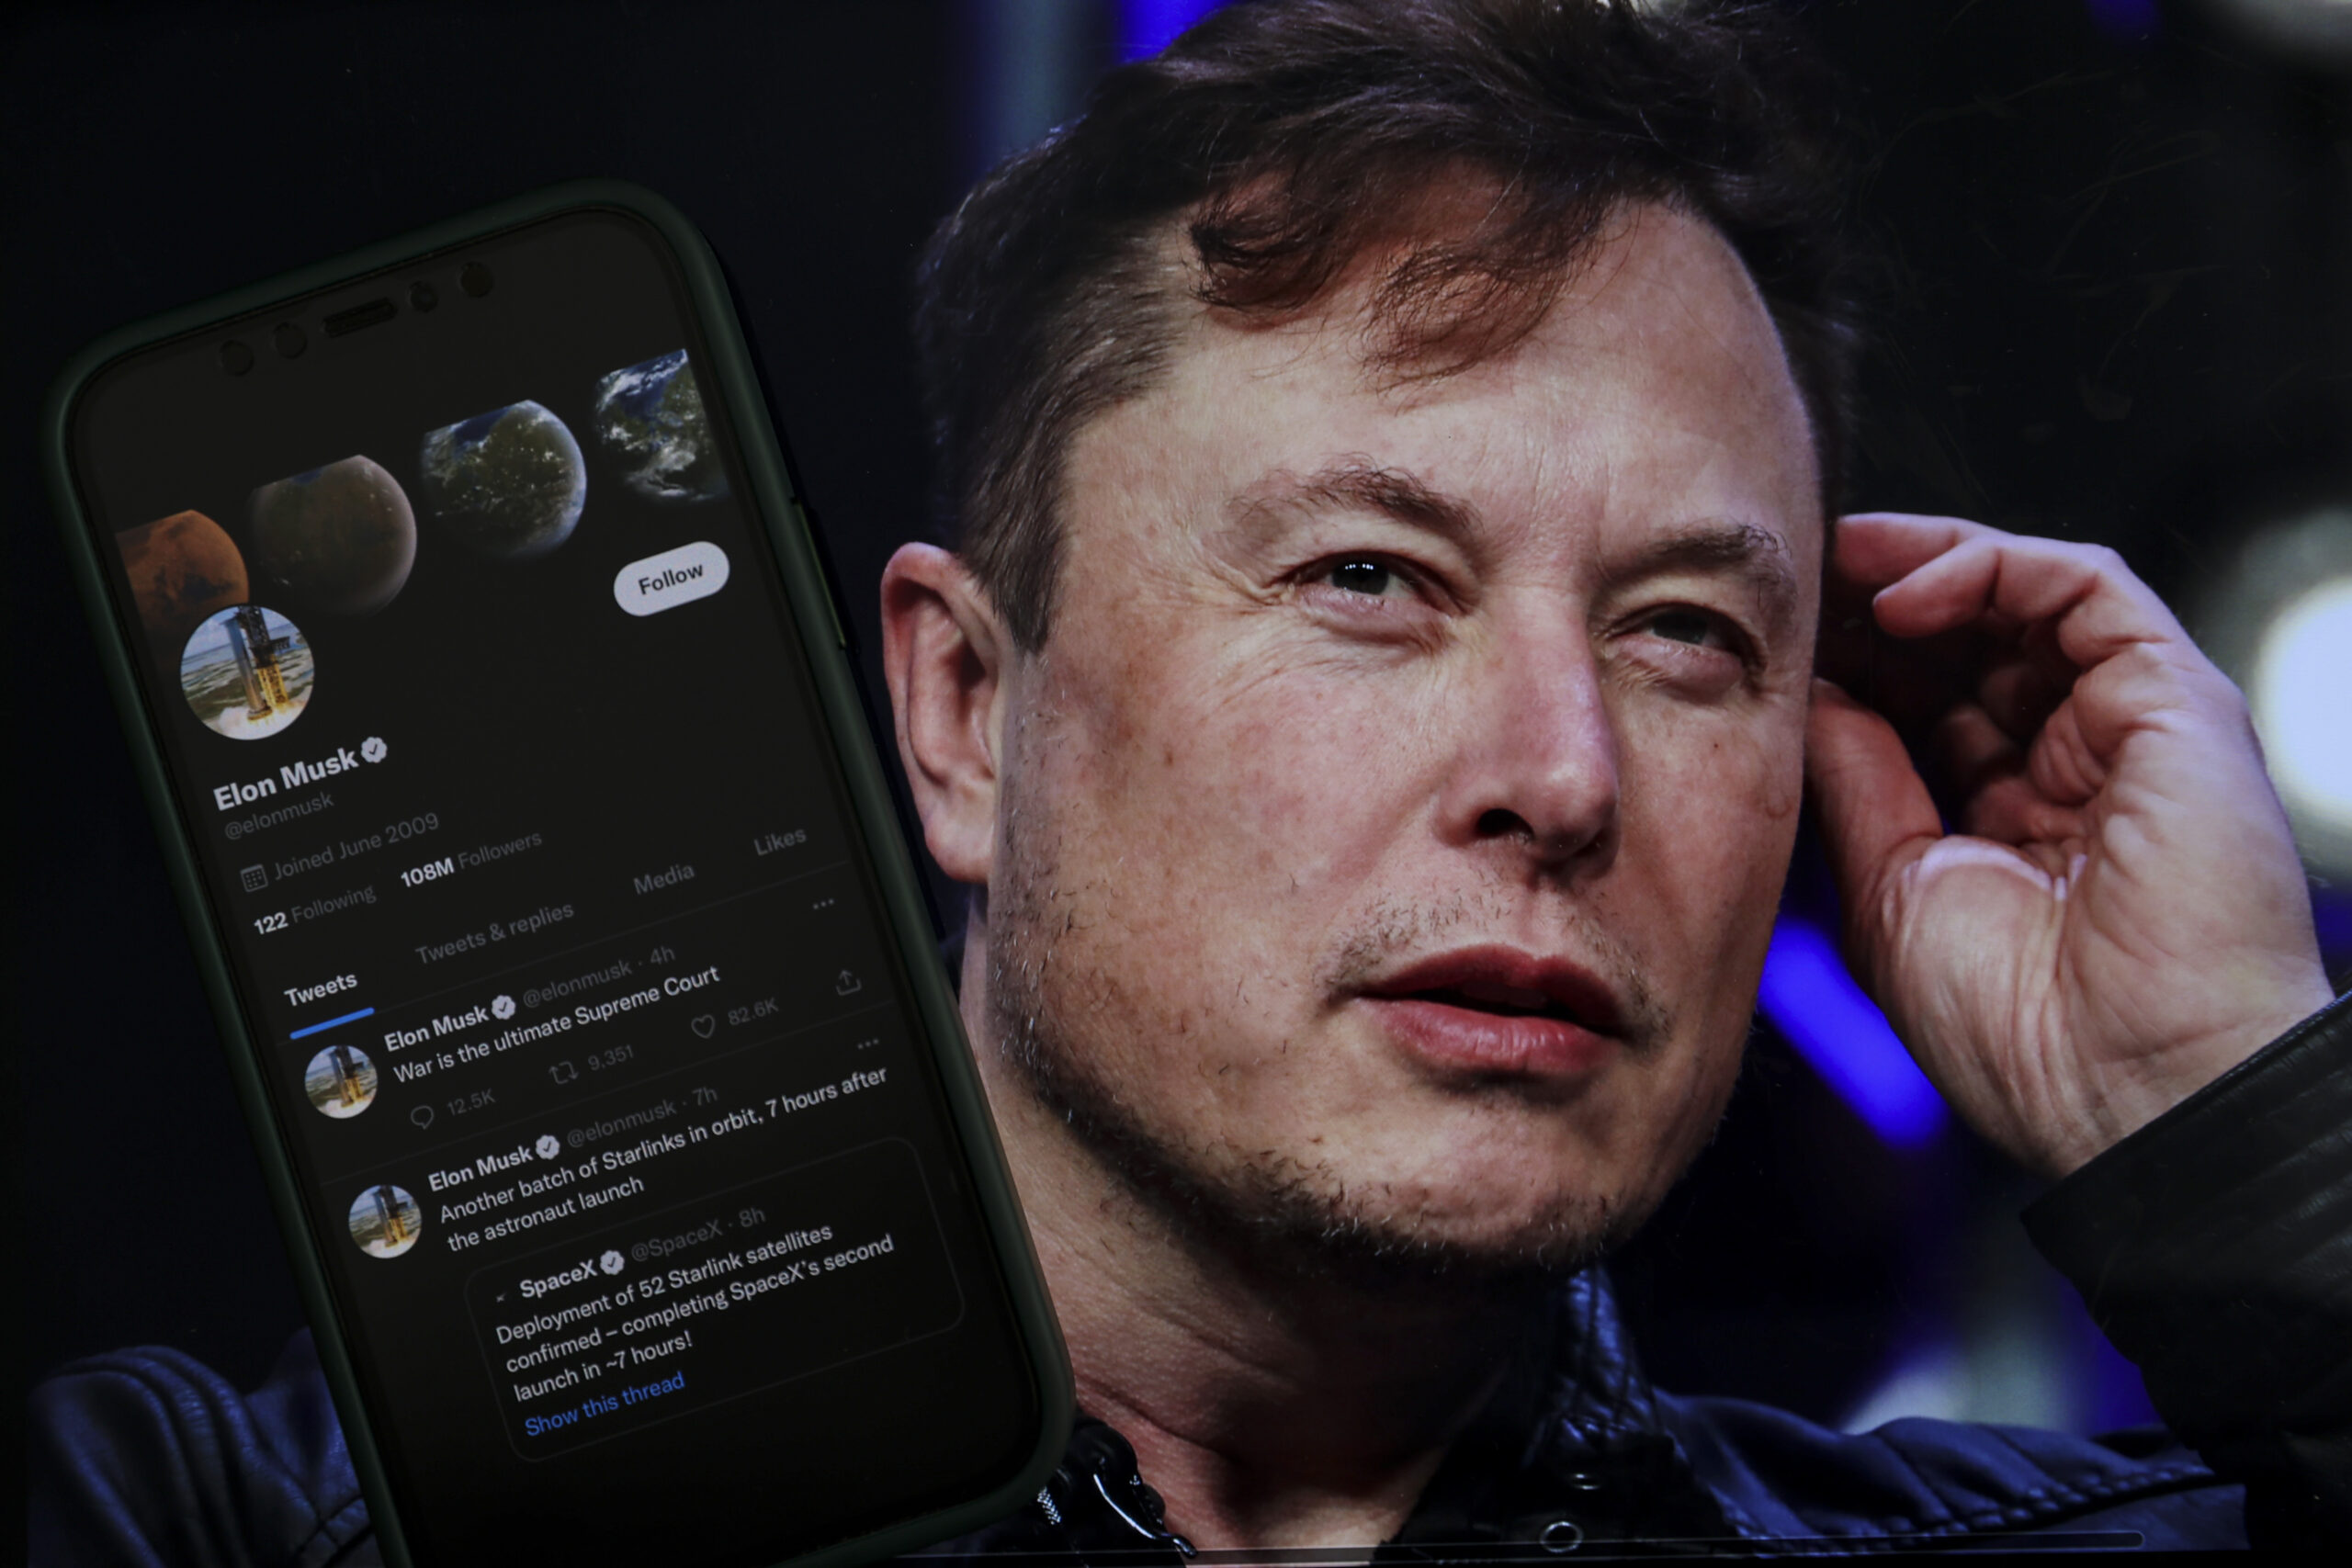 Twitter CEO Elon Musk Claims He Tried to Turn SF Office Into Homeless Shelter